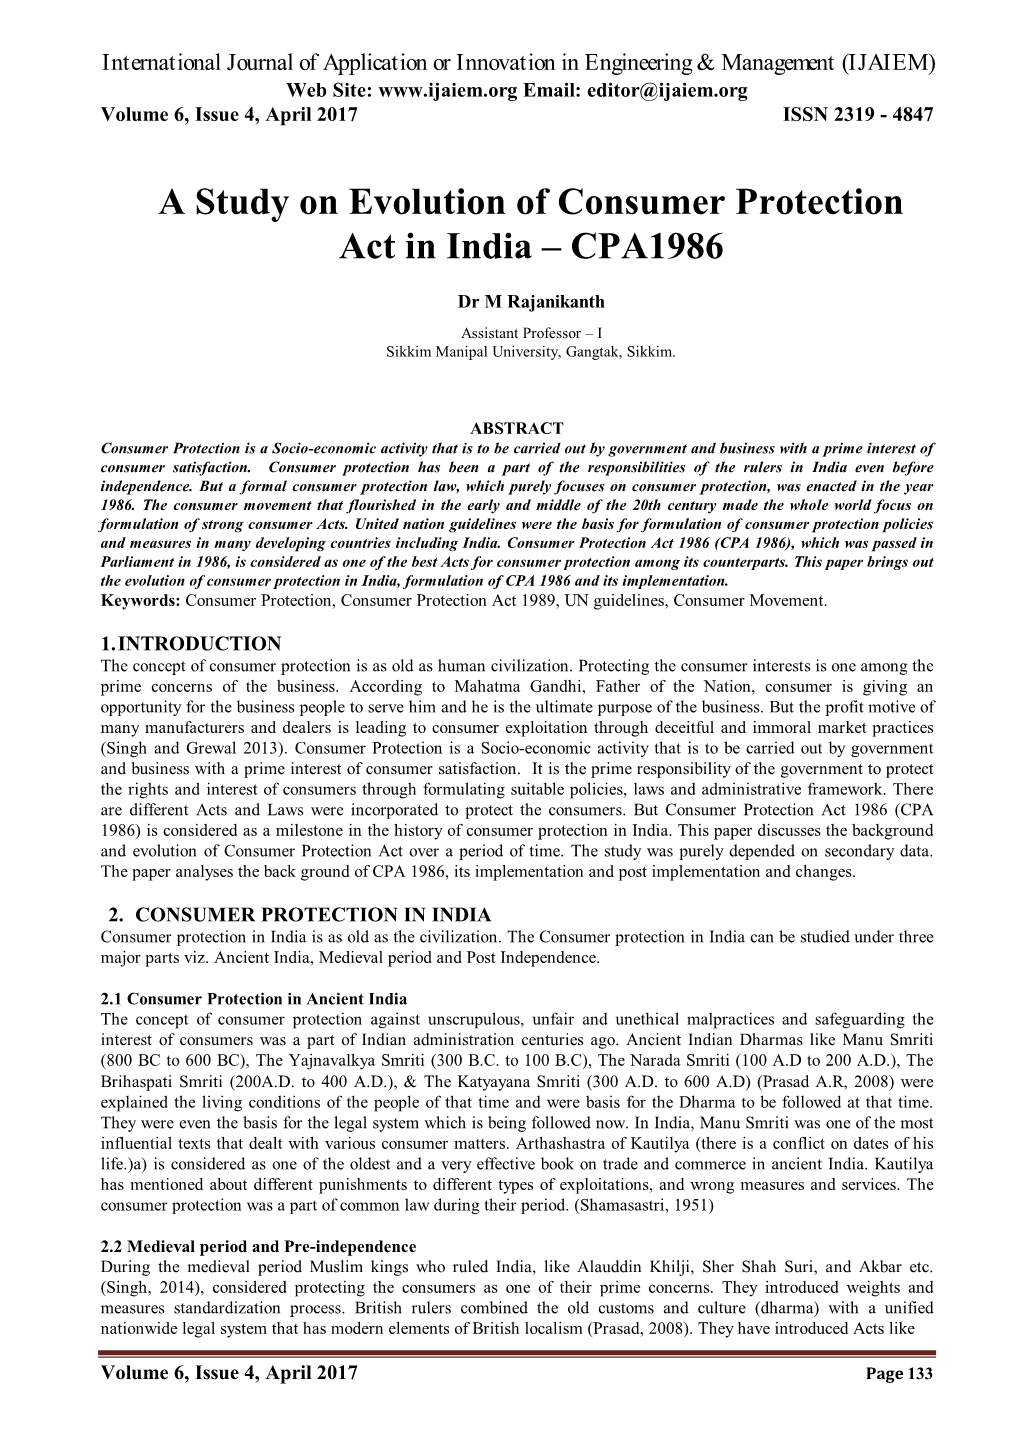 A Study on Evolution of Consumer Protection Act in India – CPA1986